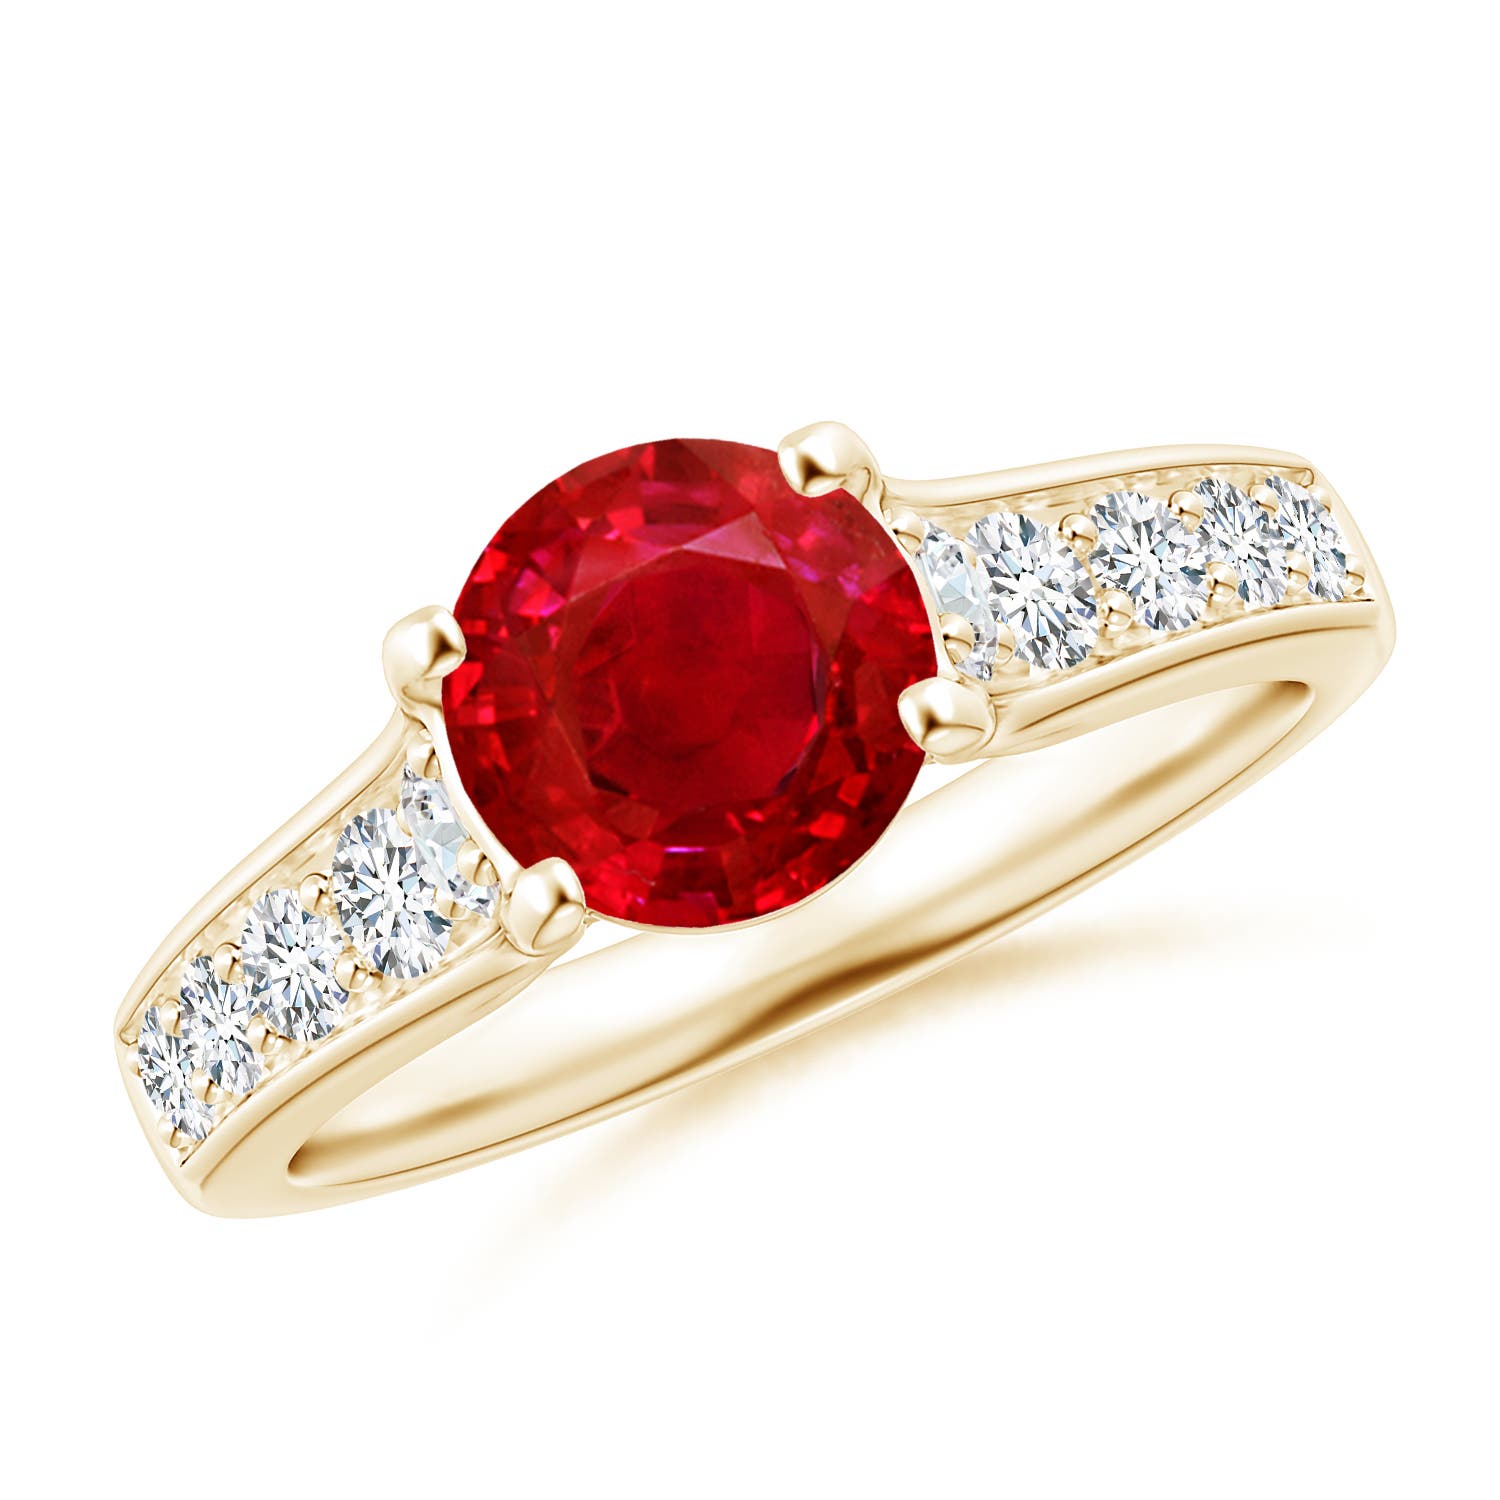 AAA - Ruby / 1.94 CT / 14 KT Yellow Gold